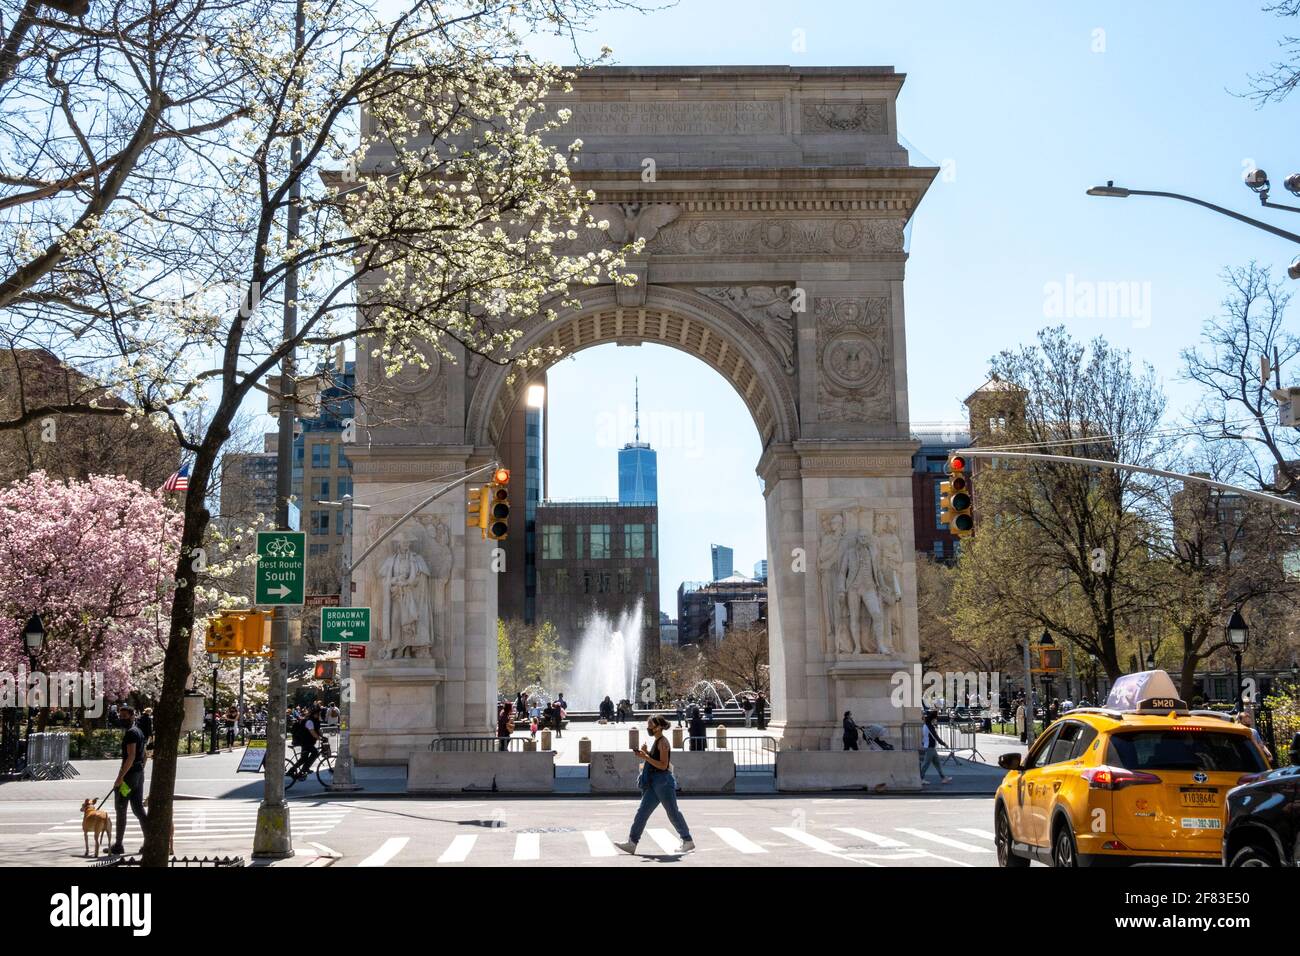 Washington Square Arch and Crowds from Fifth Avenue, Washington Square Park, Greenwich Village, NYC Stock Photo